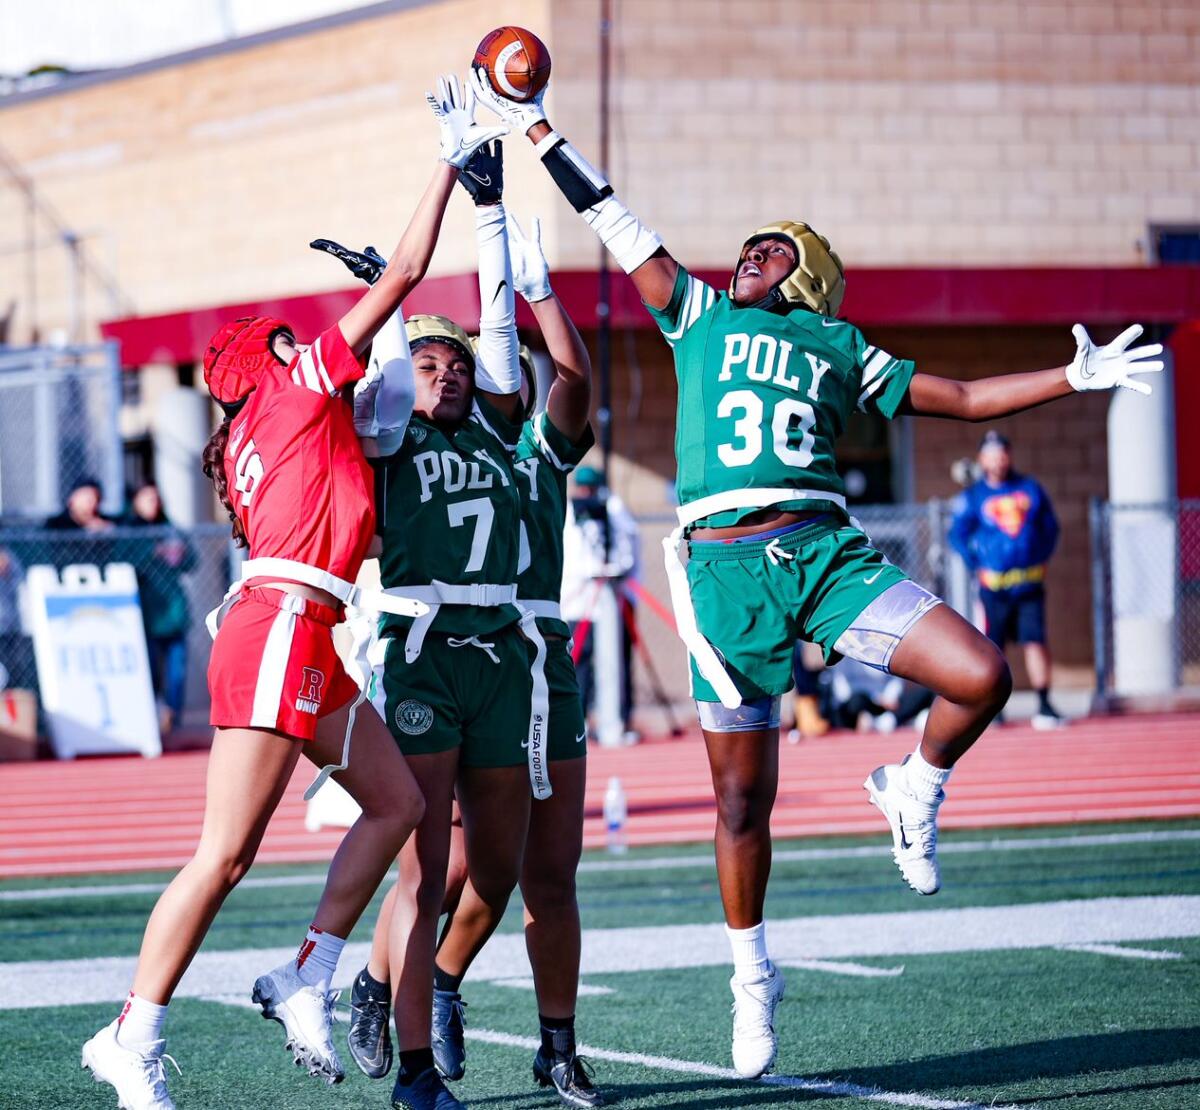 Long Beach Poly players battle for the ball in seven on seven girls' flag football tournament game.